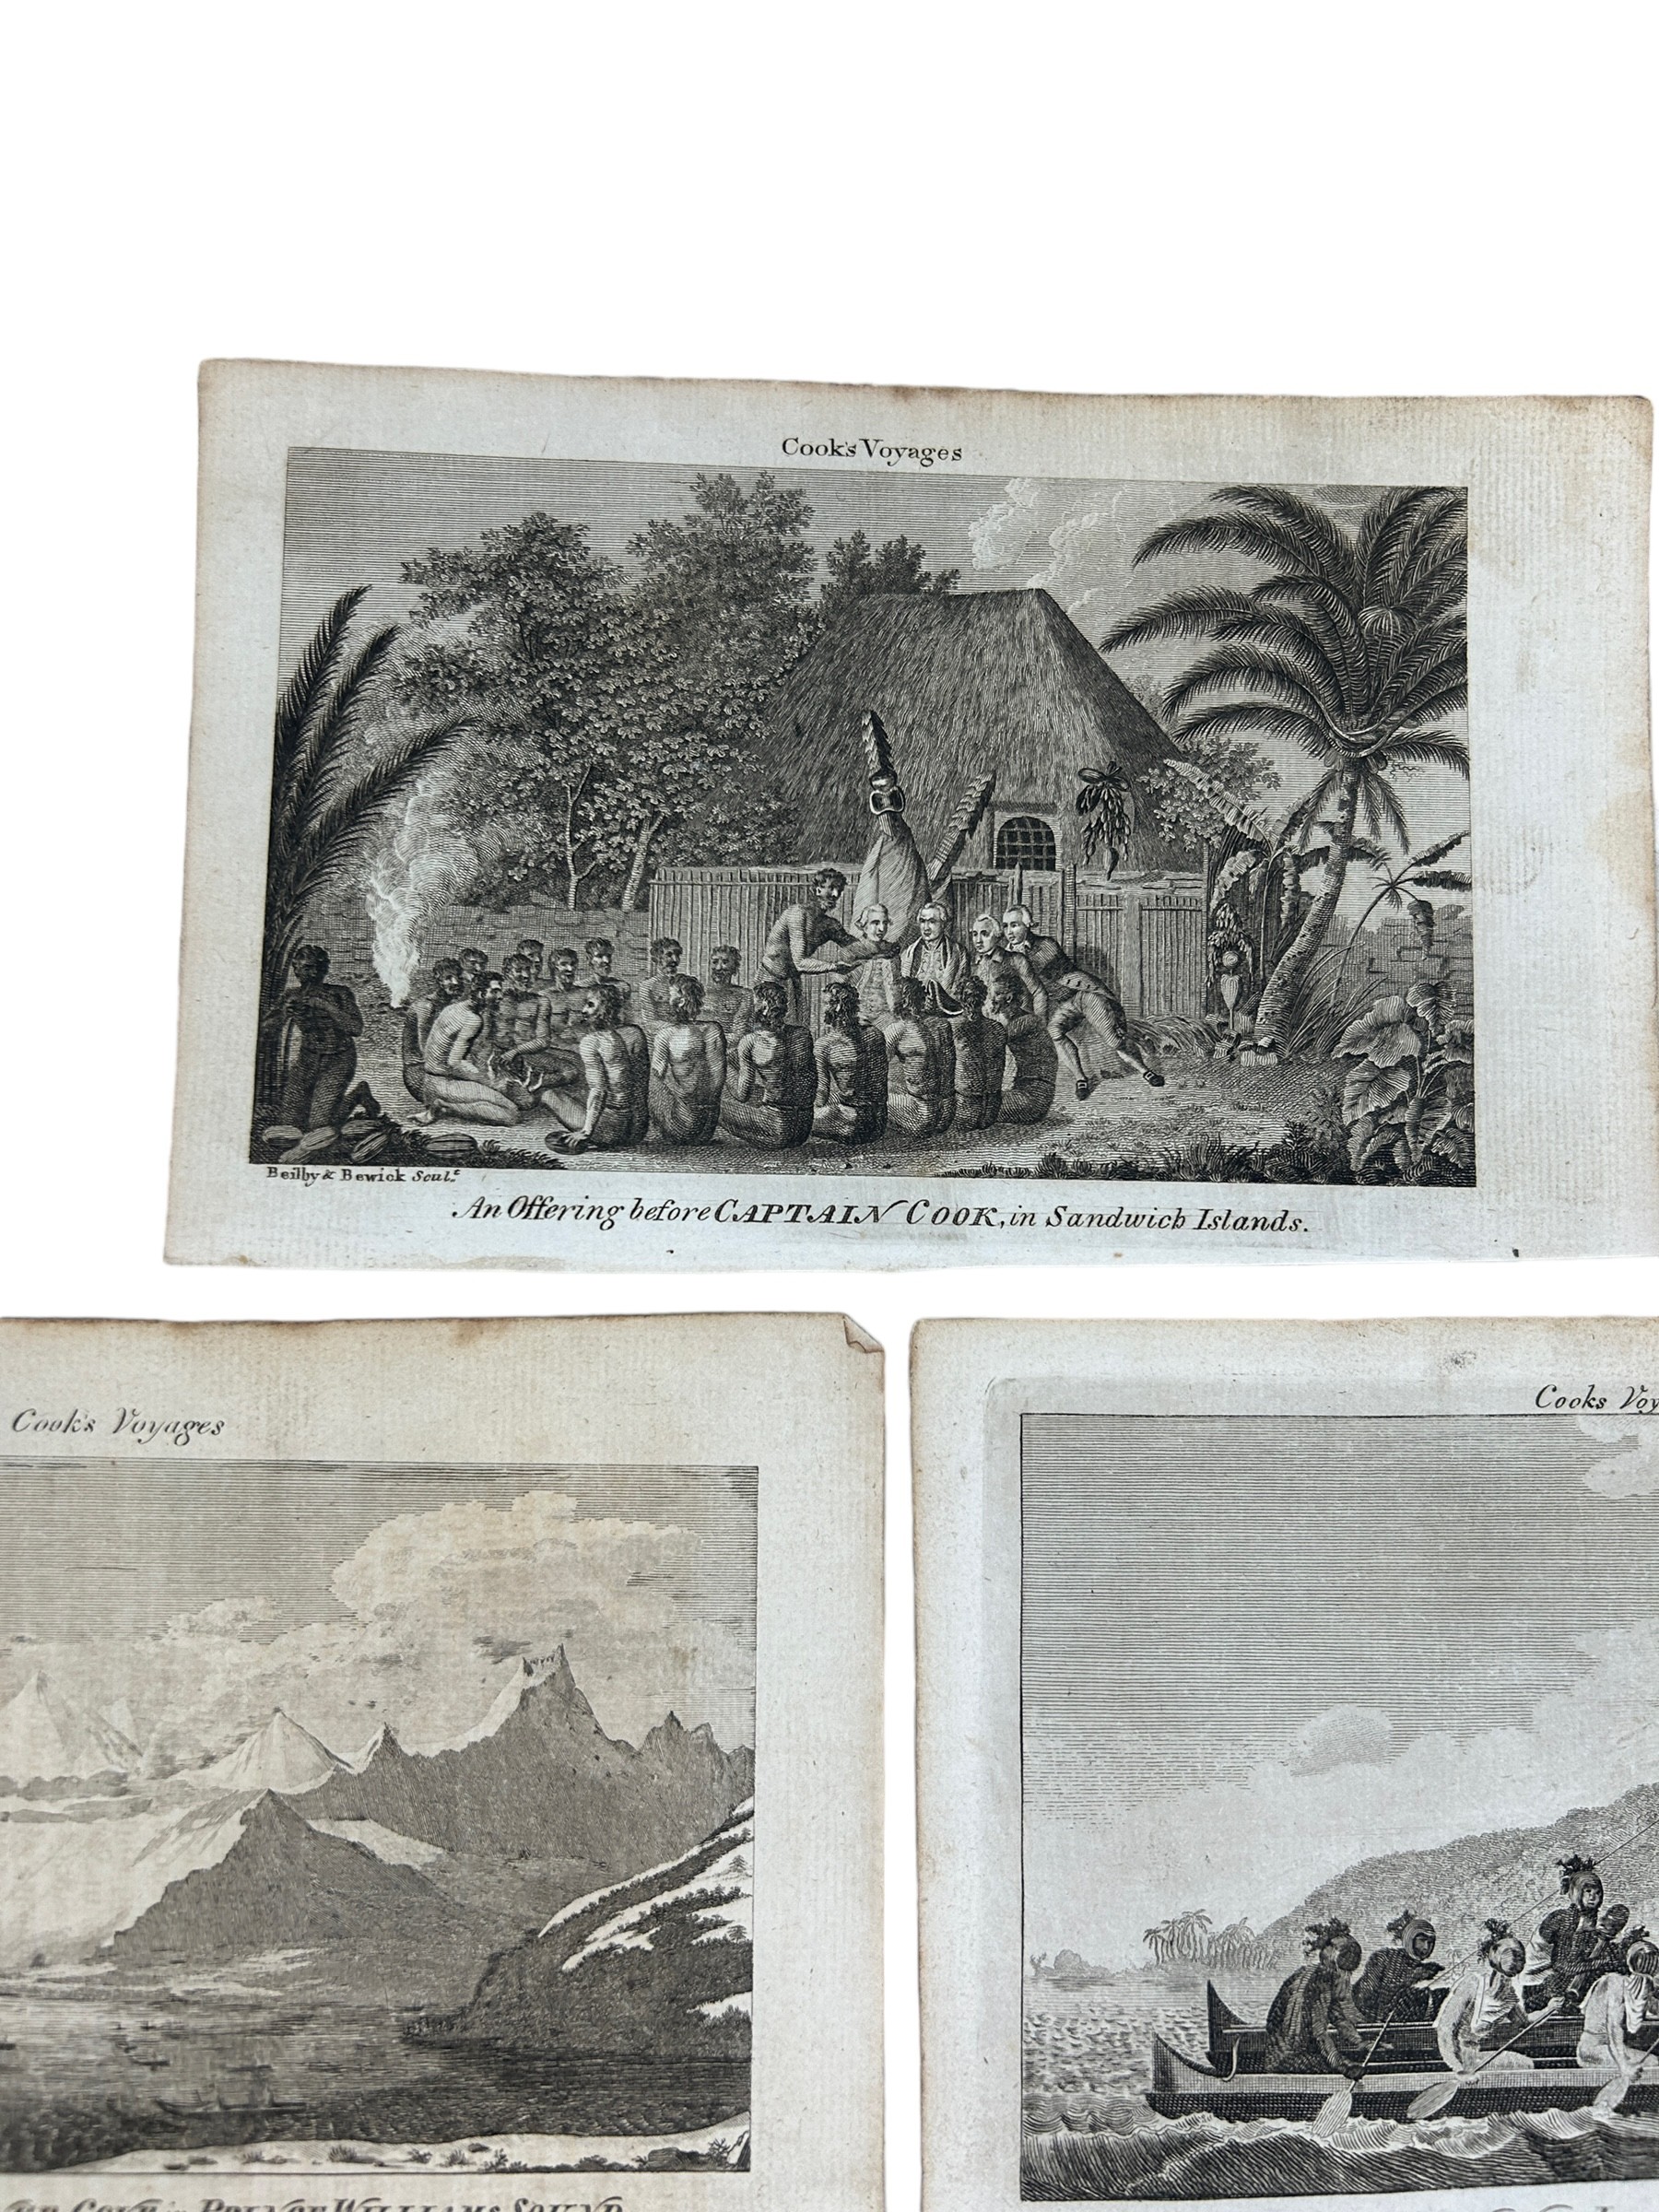 EARLY VIEWS OF COOK'S VOYAGES IN ENGRAVED FORM FROM A FOLIO (7), - Image 3 of 4